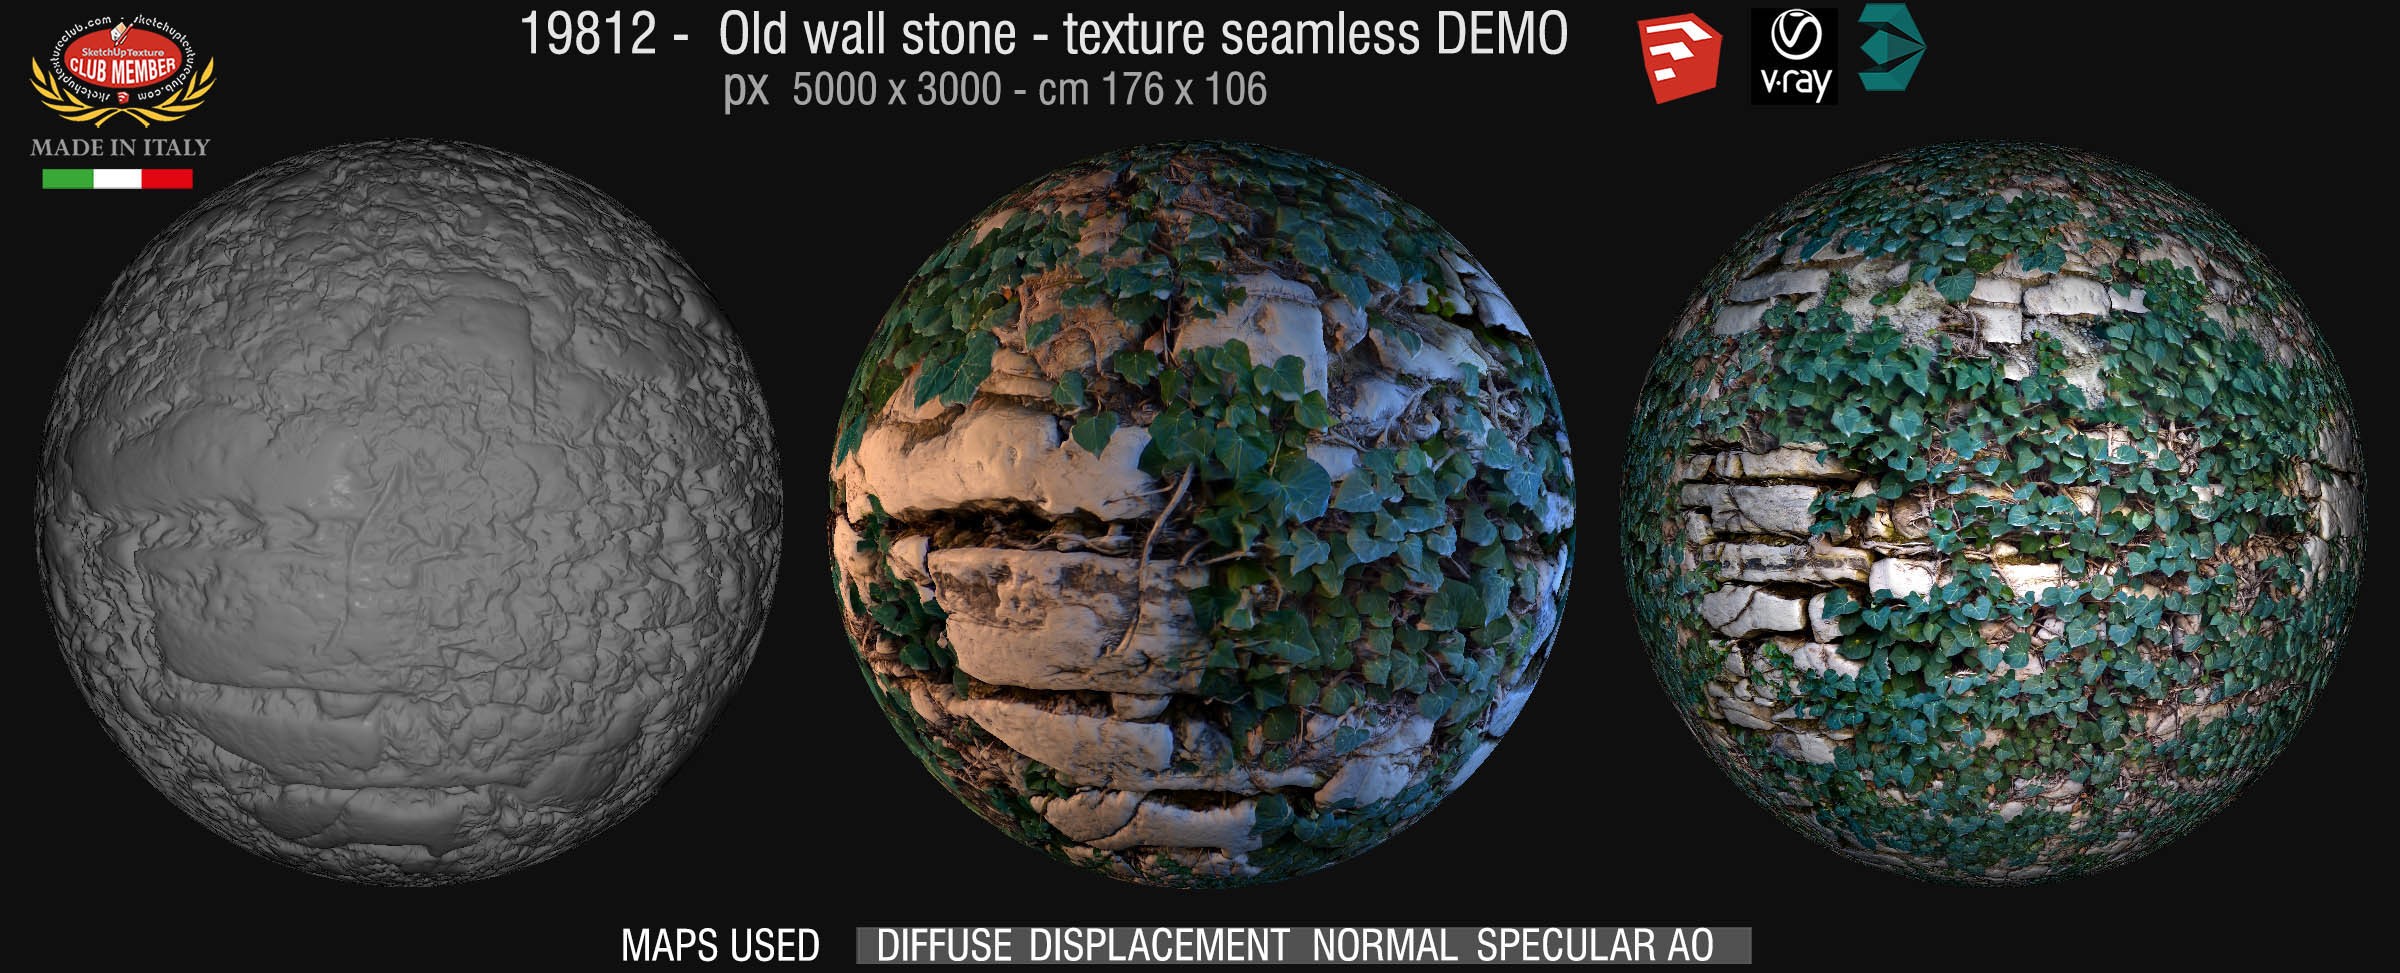 19812 - old wall stone with ivy texture + masp DEMO